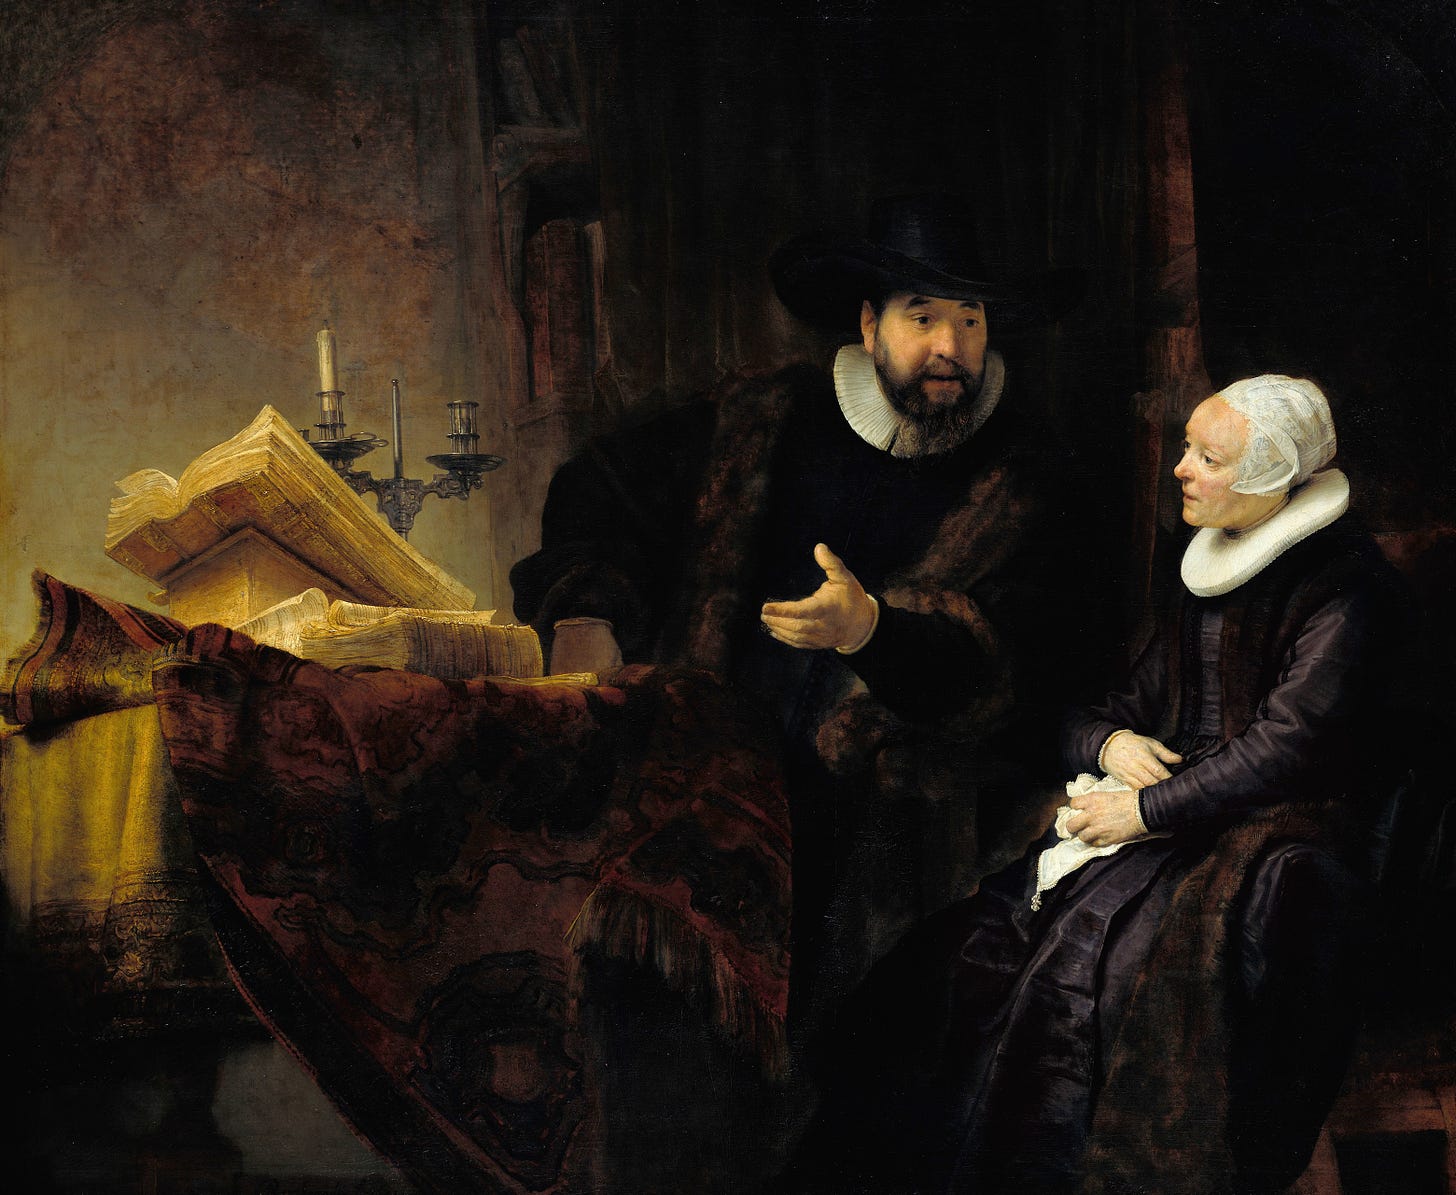 The Mennonite Preacher Anslo and his Wife (1641) by Rembrandt van Rijn